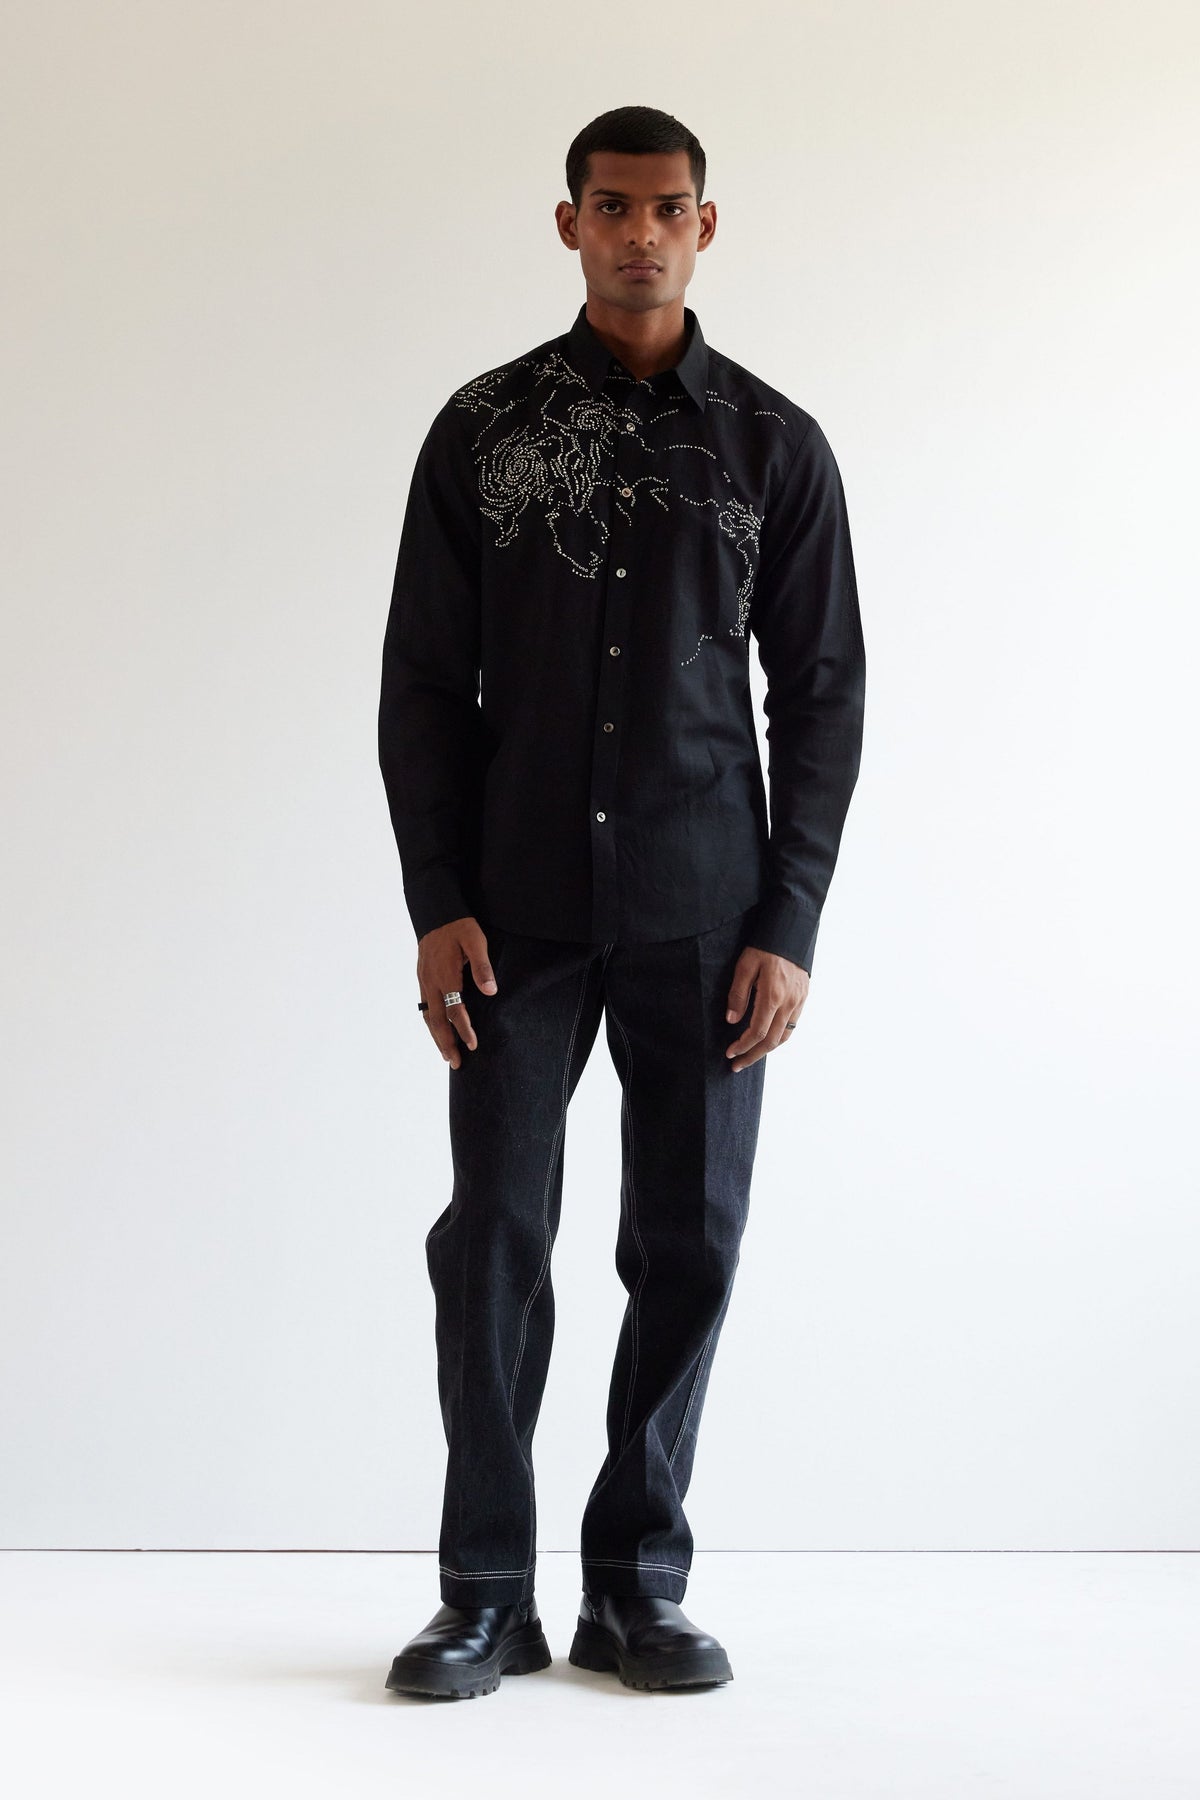 Black Hole Embroidered Shirt